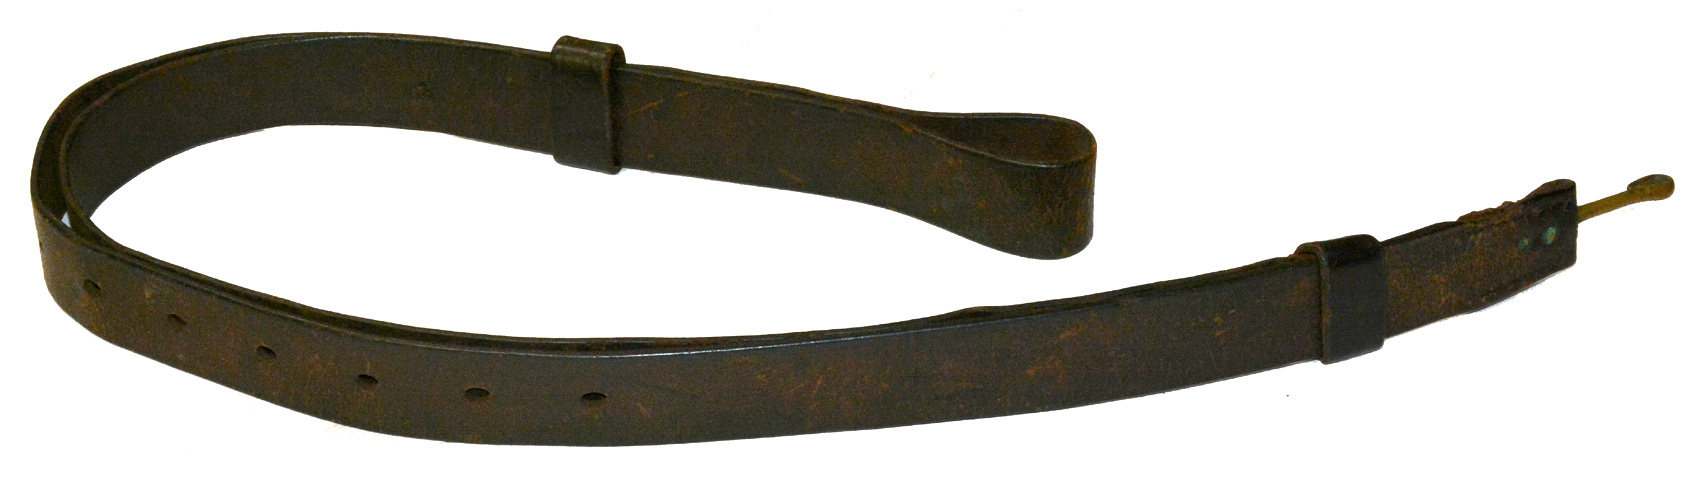 US/CS CIVIL WAR RIFLE SLING FOR THE PATTERN 1853 ENFIELD 